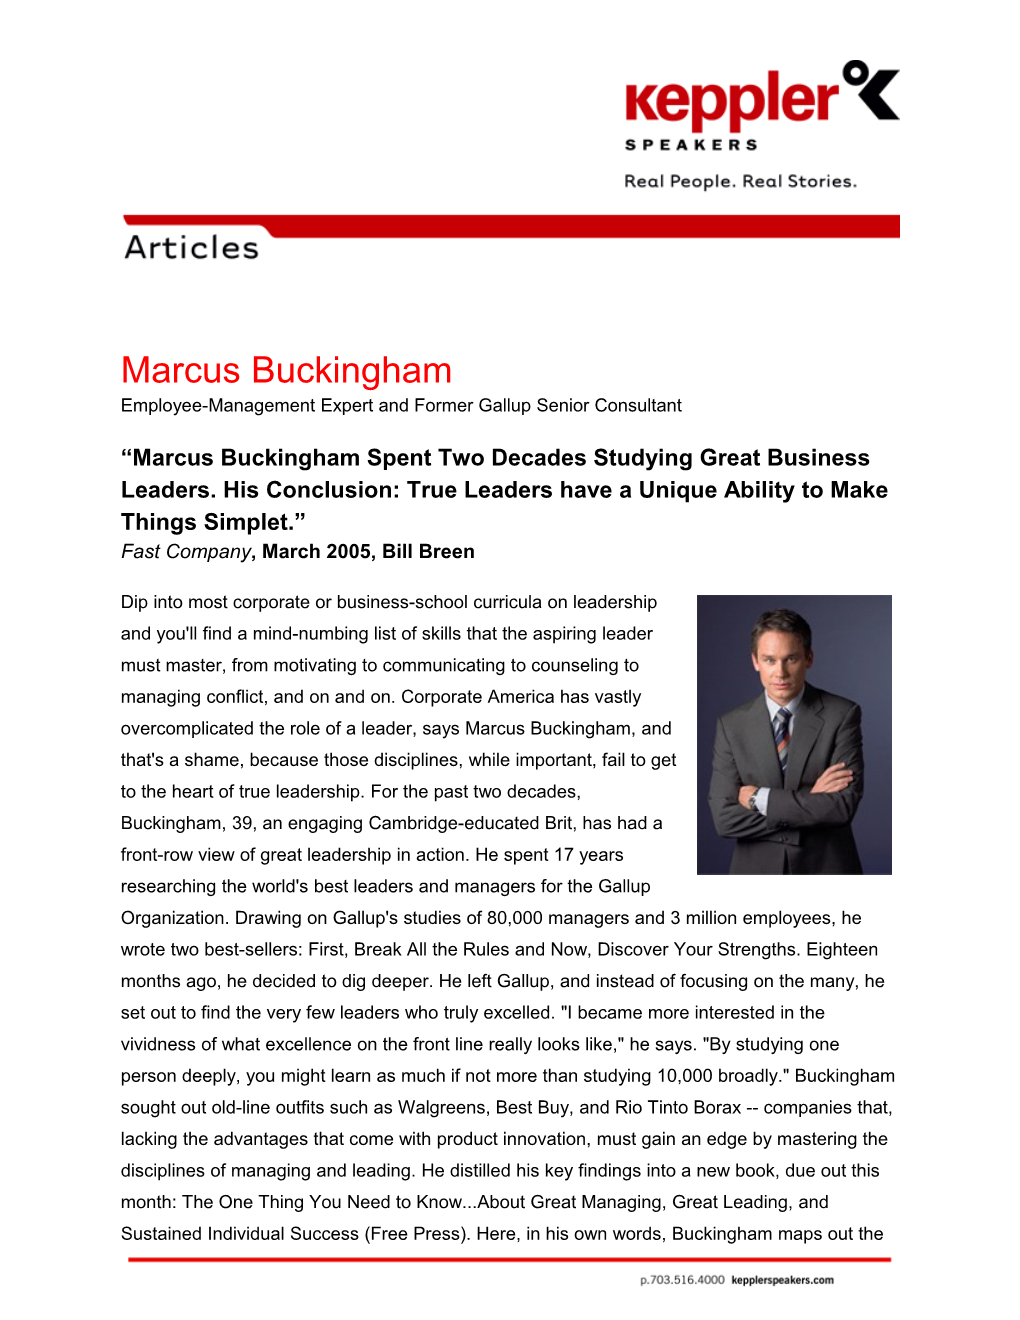 Marcus Buckingham Employee-Management Expert and Former Gallup Senior Consultant